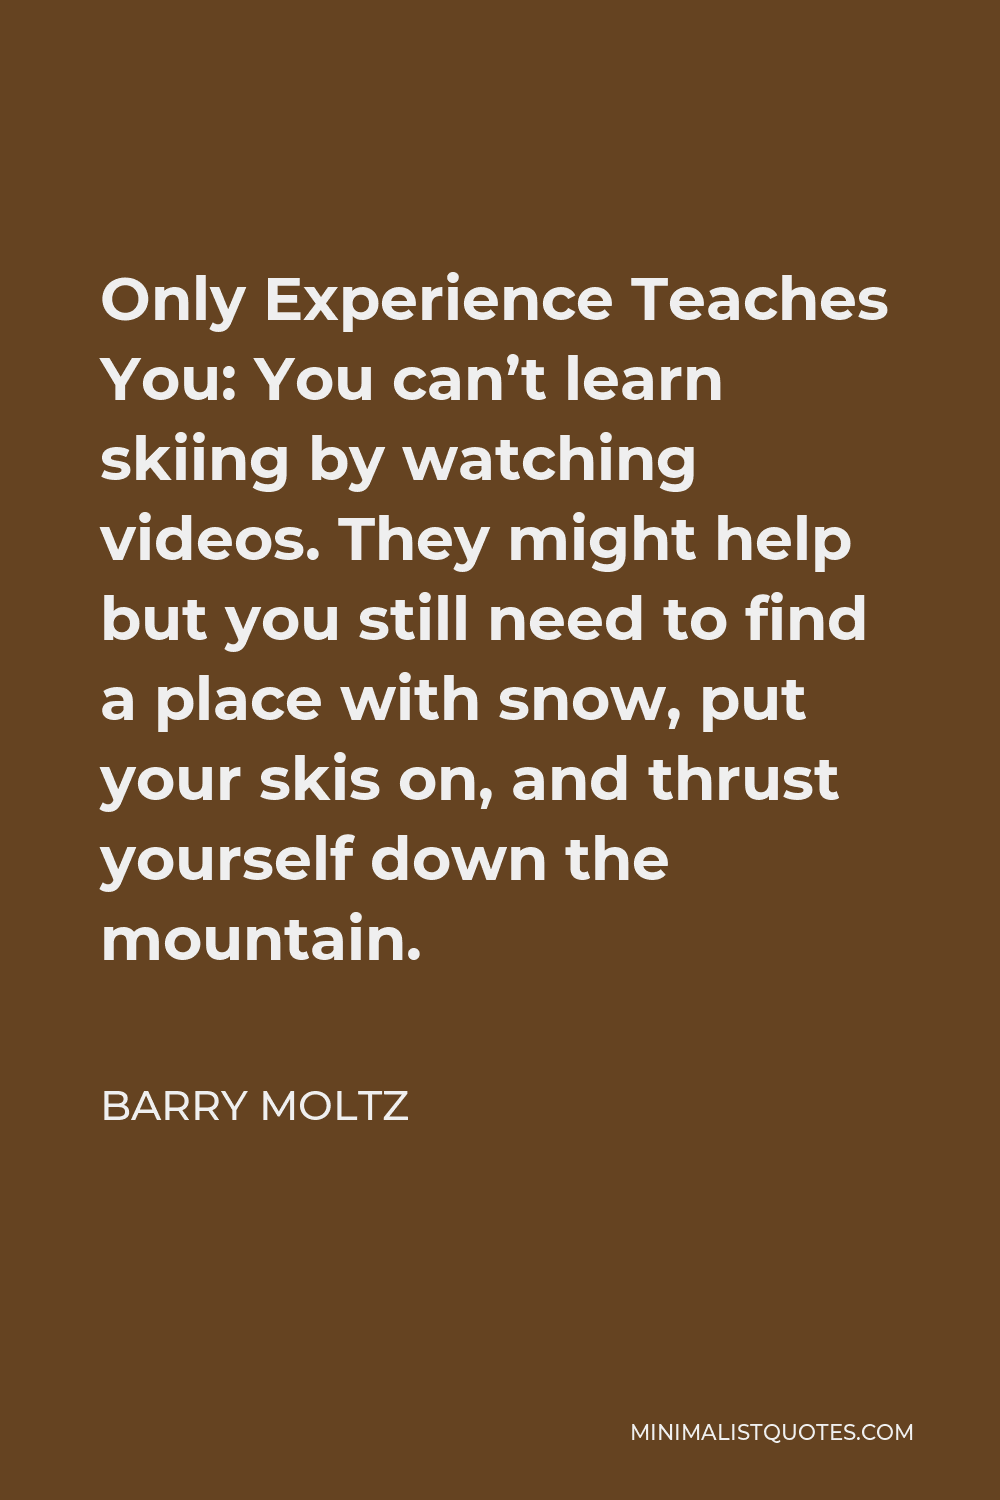 Barry Moltz Quote - Only Experience Teaches You: You can’t learn skiing by watching videos. They might help but you still need to find a place with snow, put your skis on, and thrust yourself down the mountain.